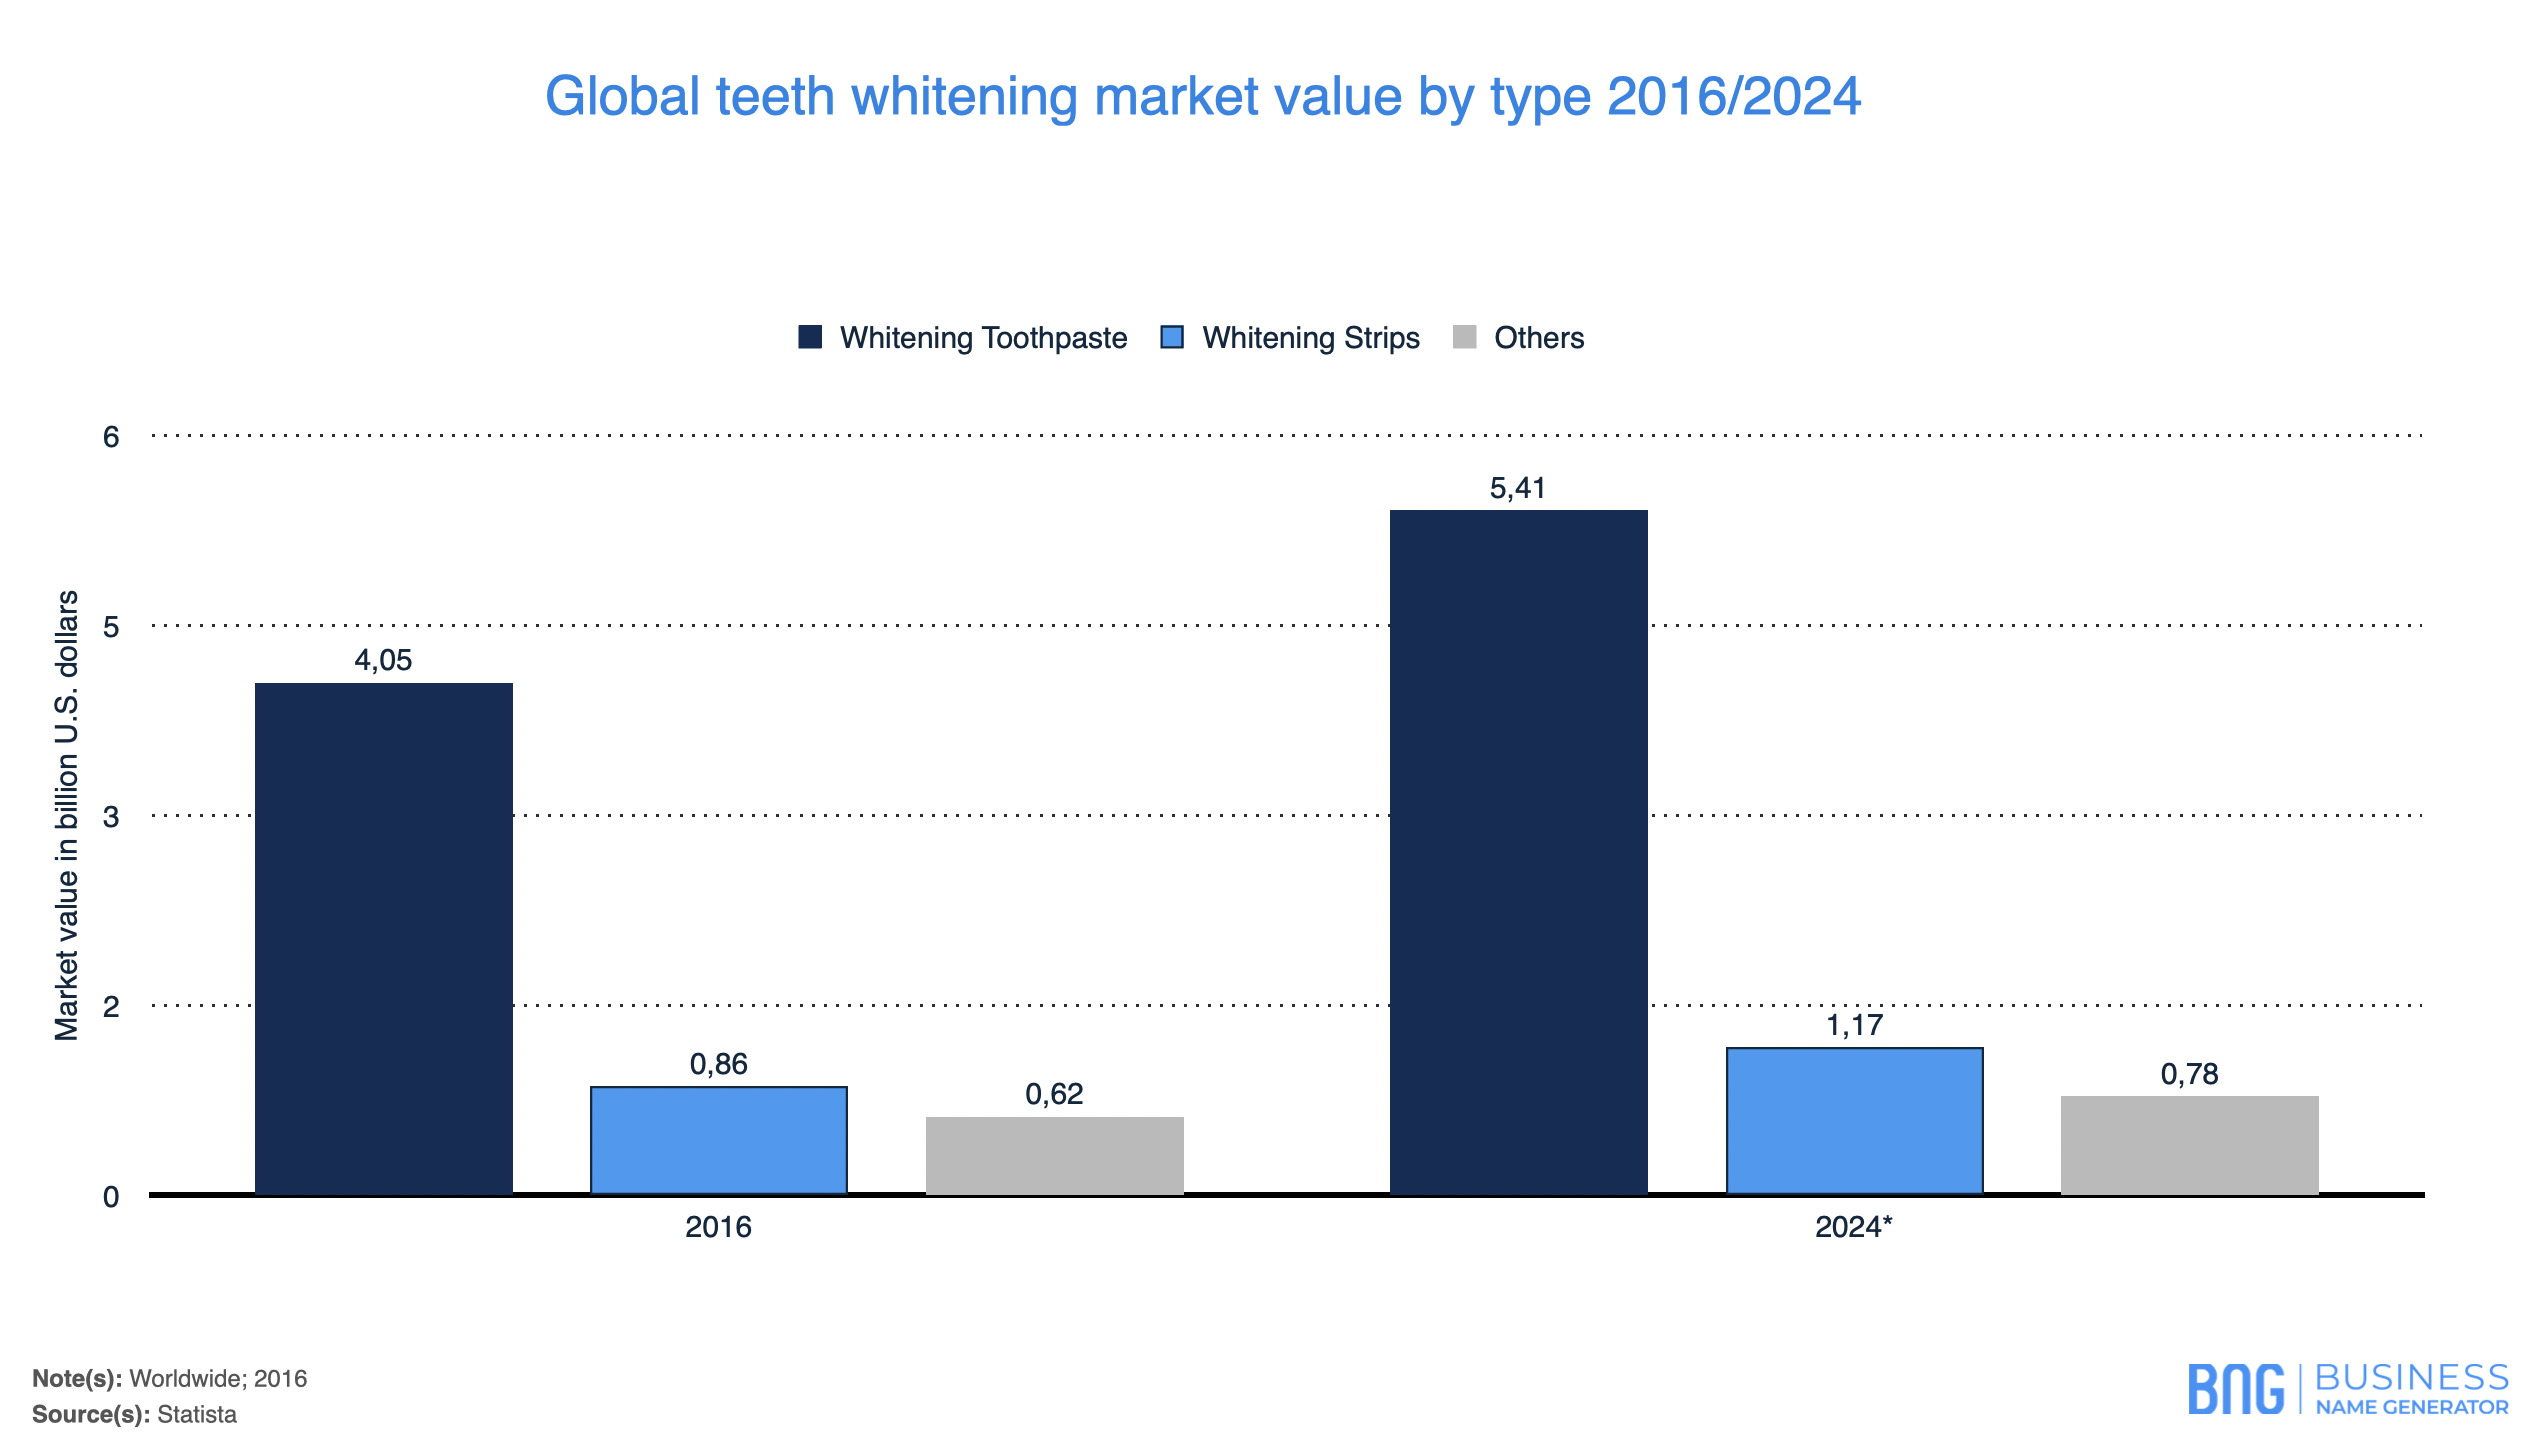 Stats on the Global teeth whitening market value by type 2016/2024